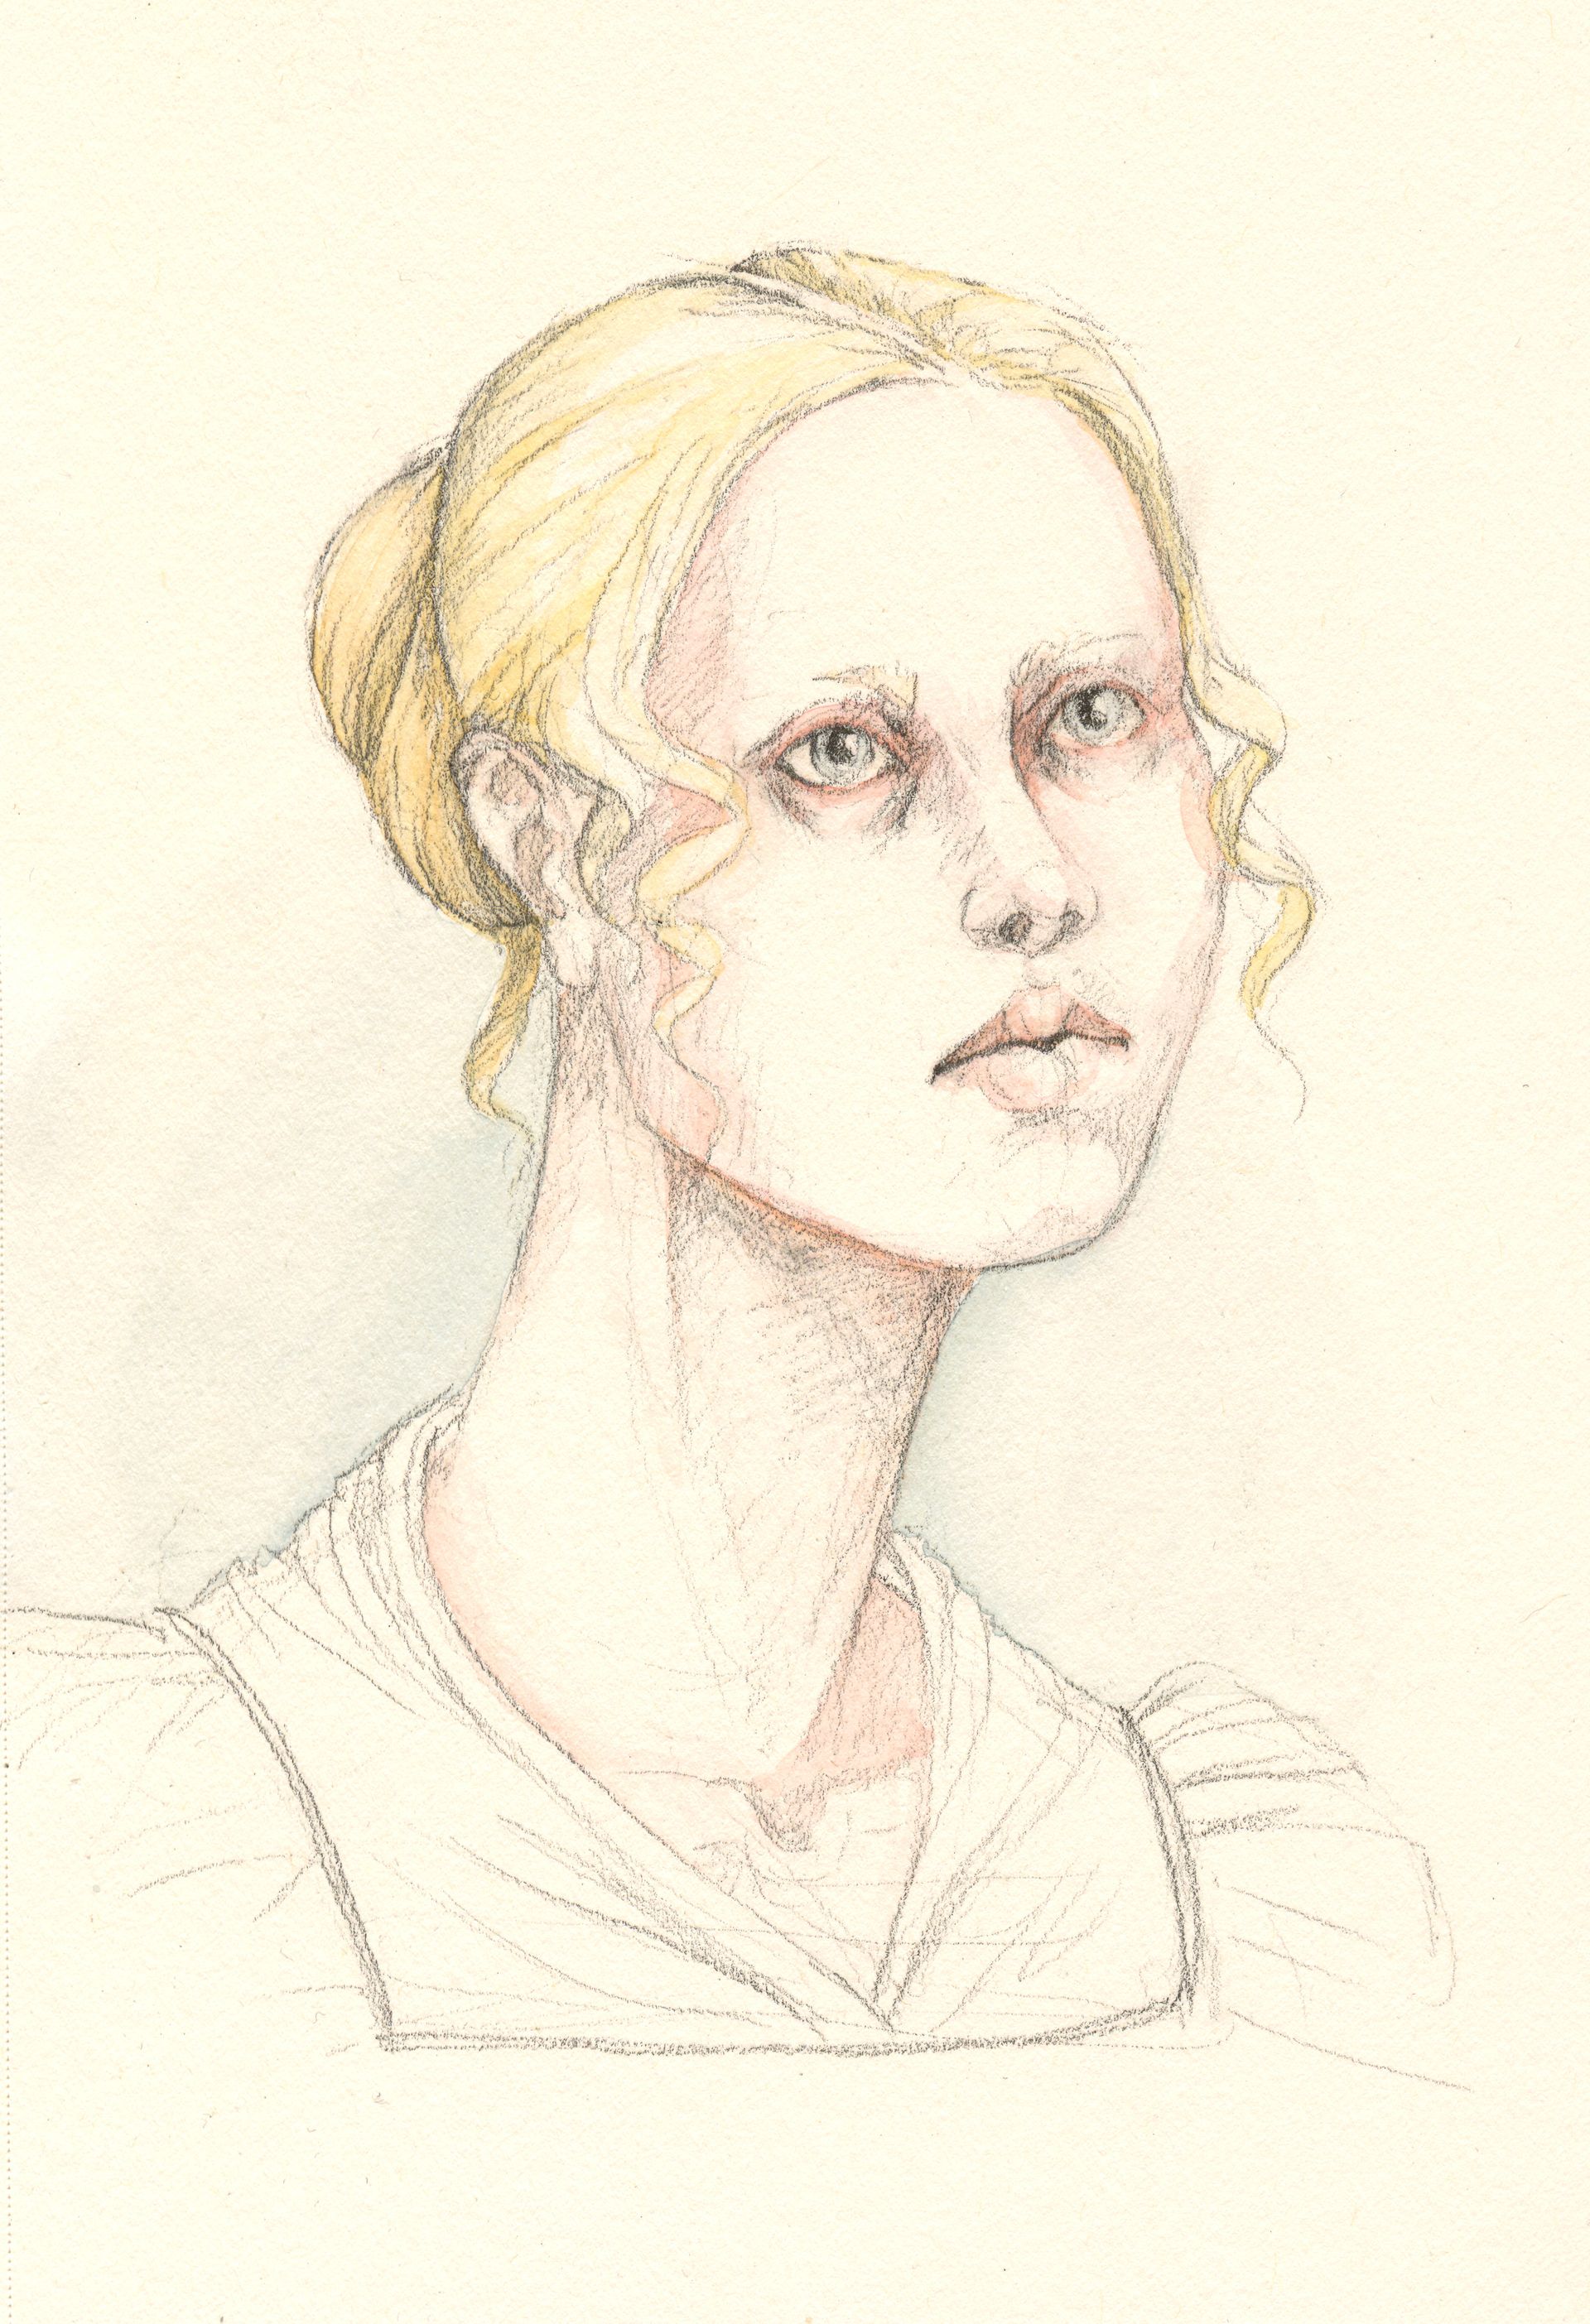 Soft watercolor portrait of Fanny Price, the character of Jane Austen's Mansfield Park